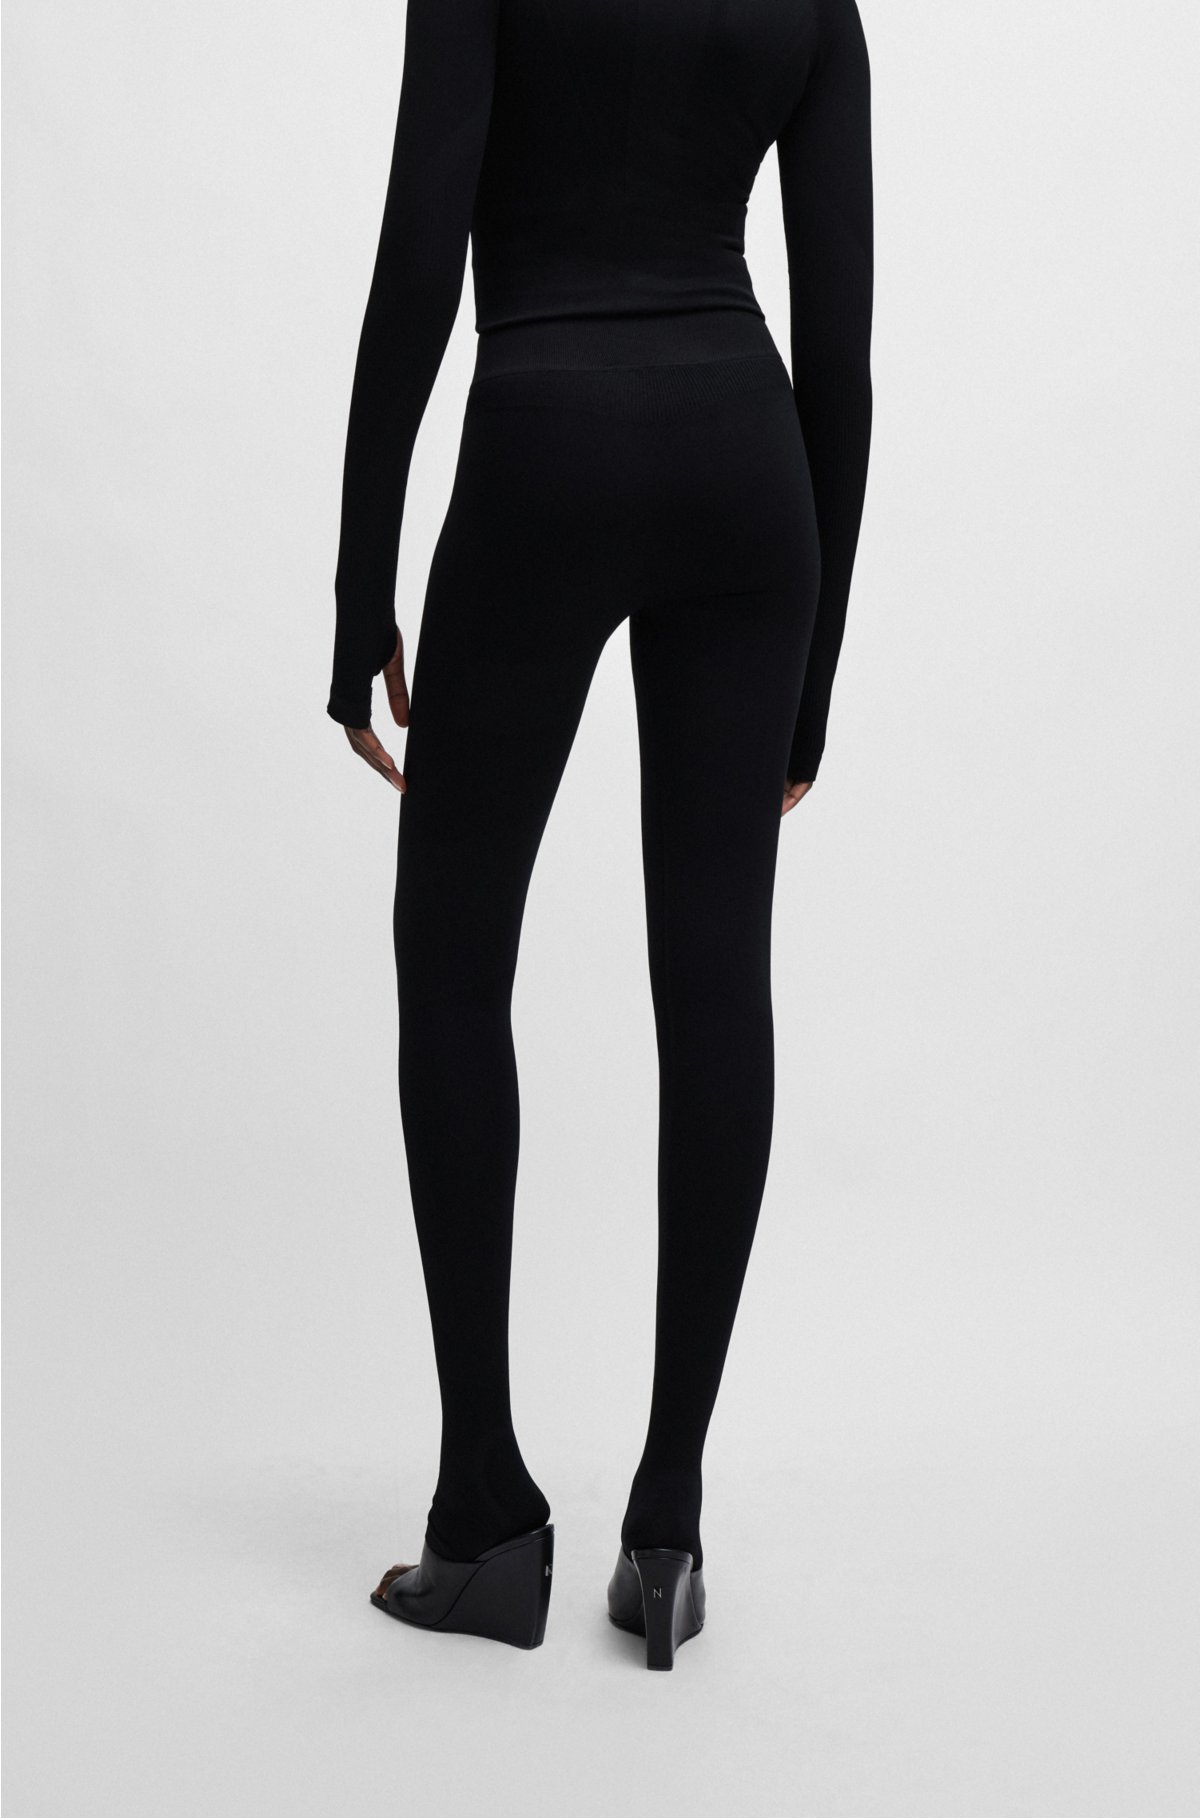 NAOMI x BOSS stretch-jersey leggings with branded waistband, Black